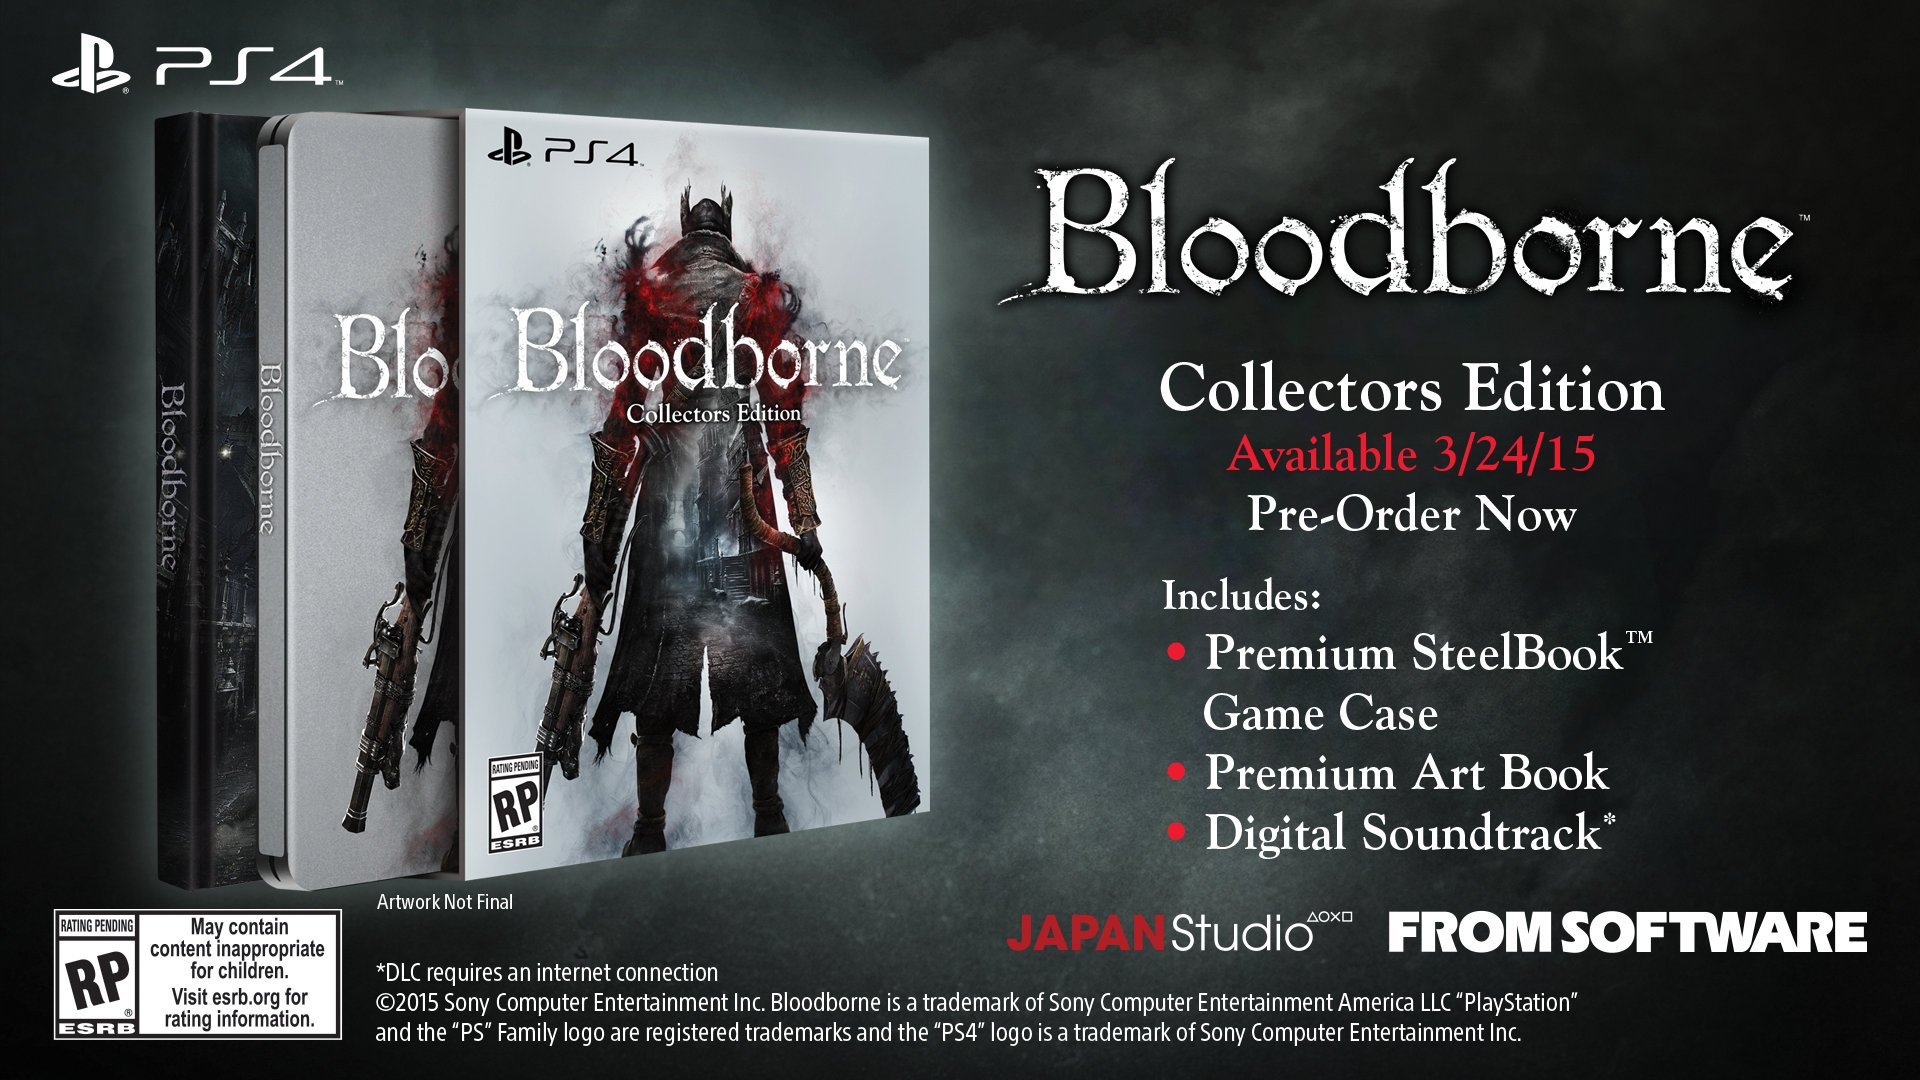 There is a special Bloodborne Collector's Edition.